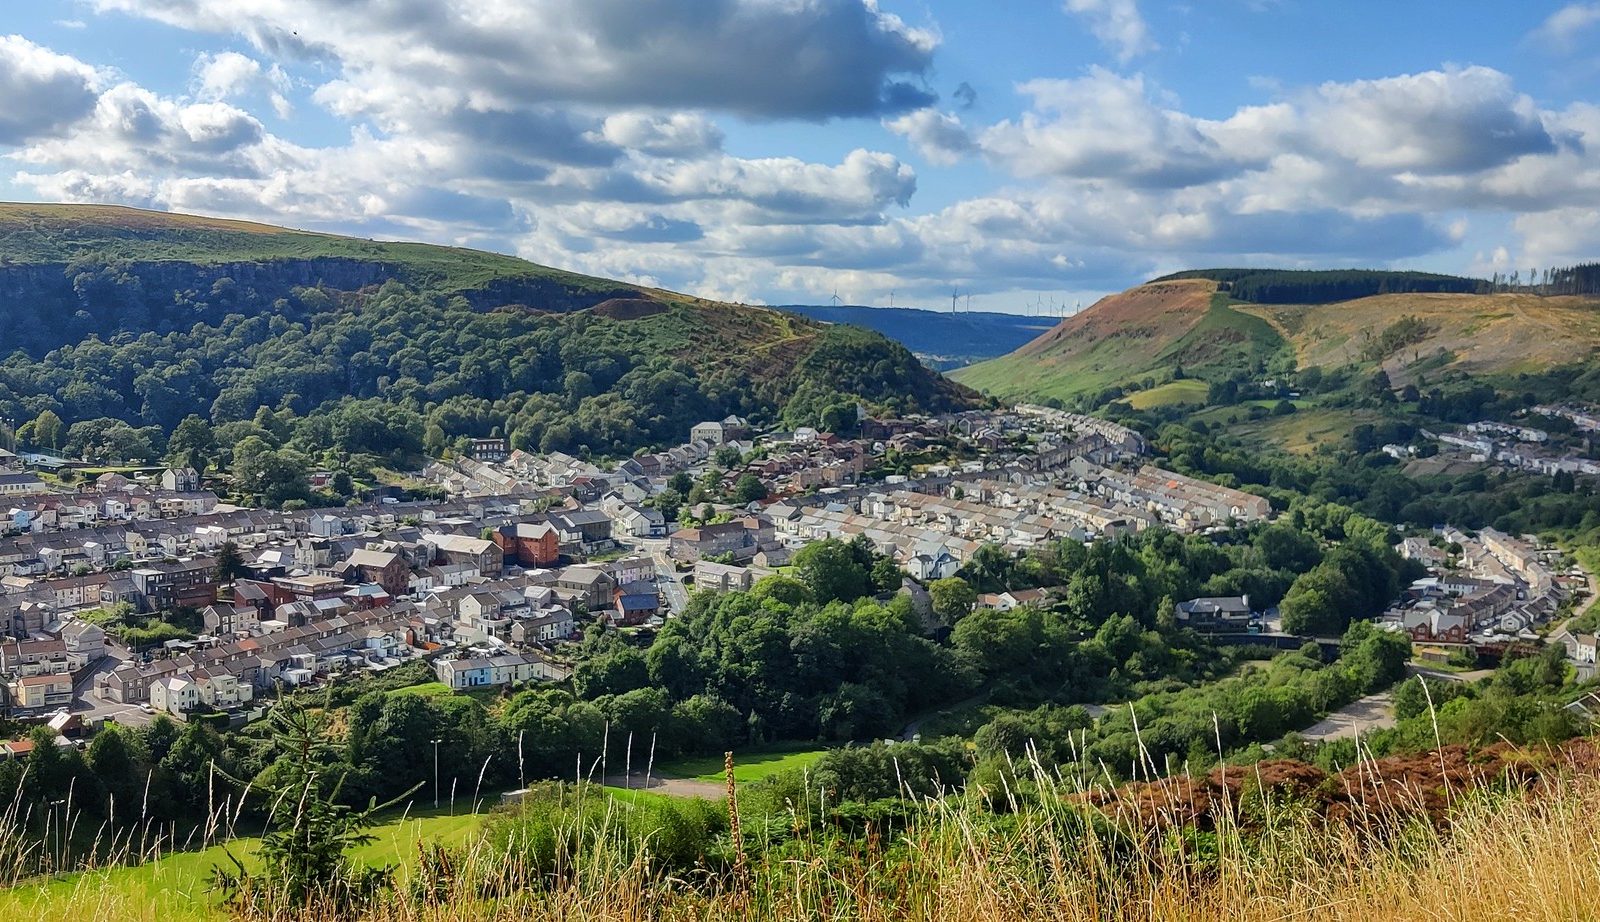 Trivallis Housing Landlord Wales A sprawling town known as Trivallis, nestled in a valley with residential housing areas concentrated at the center, surrounded by lush, green hills under a partly cloudy sky.